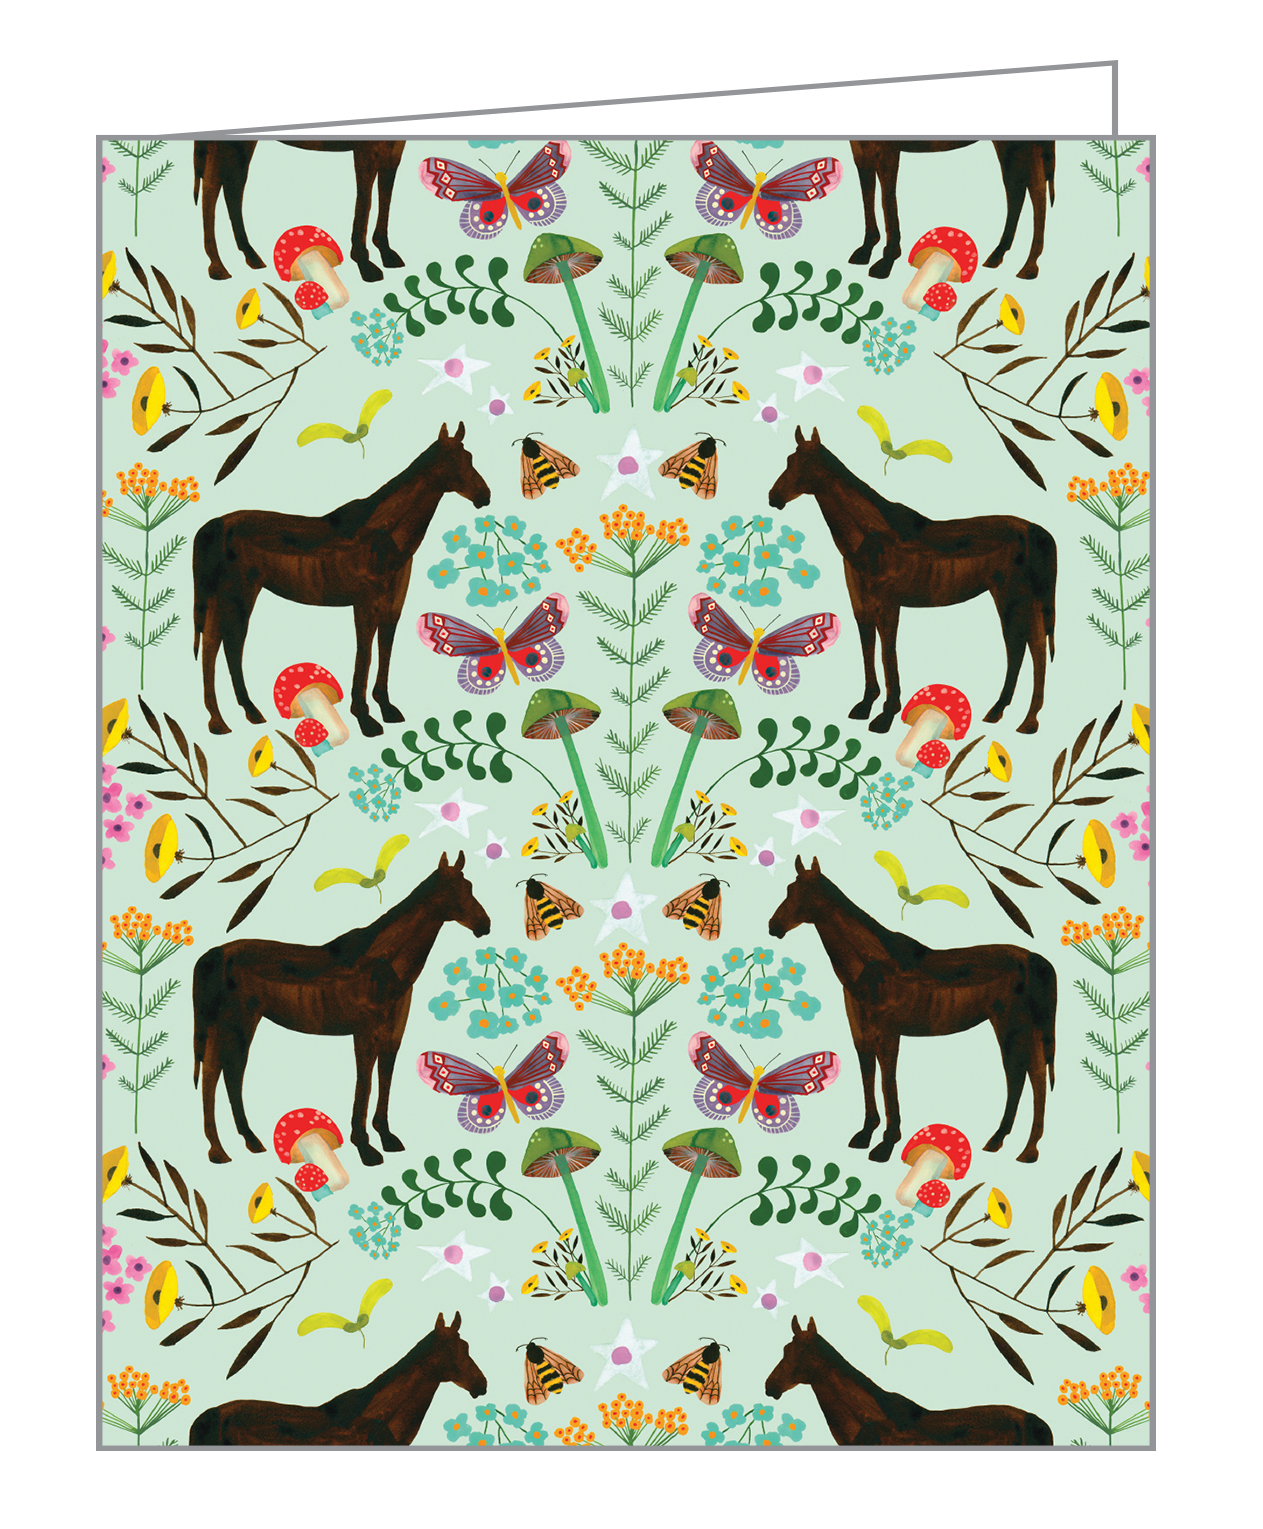 Anisa Makhoul's folk art horse and wild flora and fauna design, to notecard box, by teNeues Stationery.